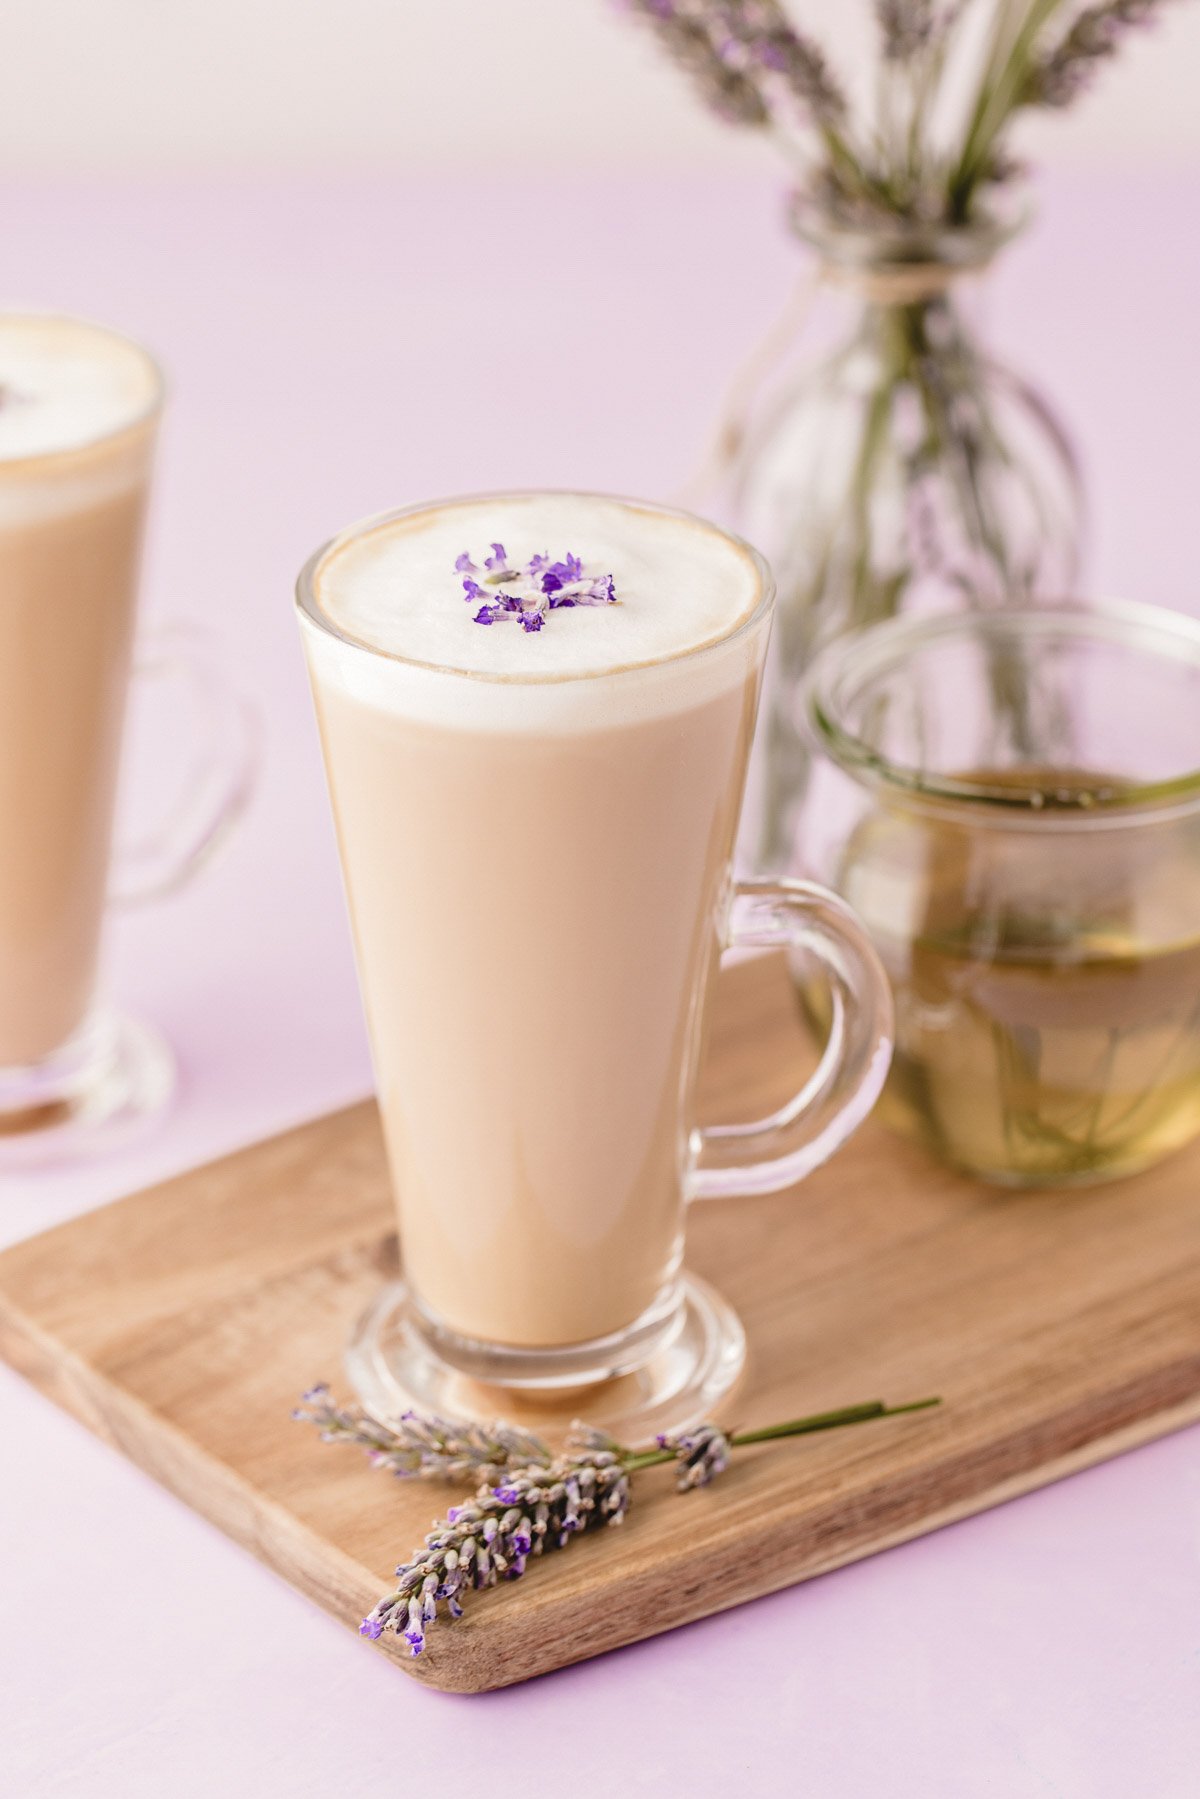 Two mugs of lavender lattes on a wooden serving board on a purple surface.